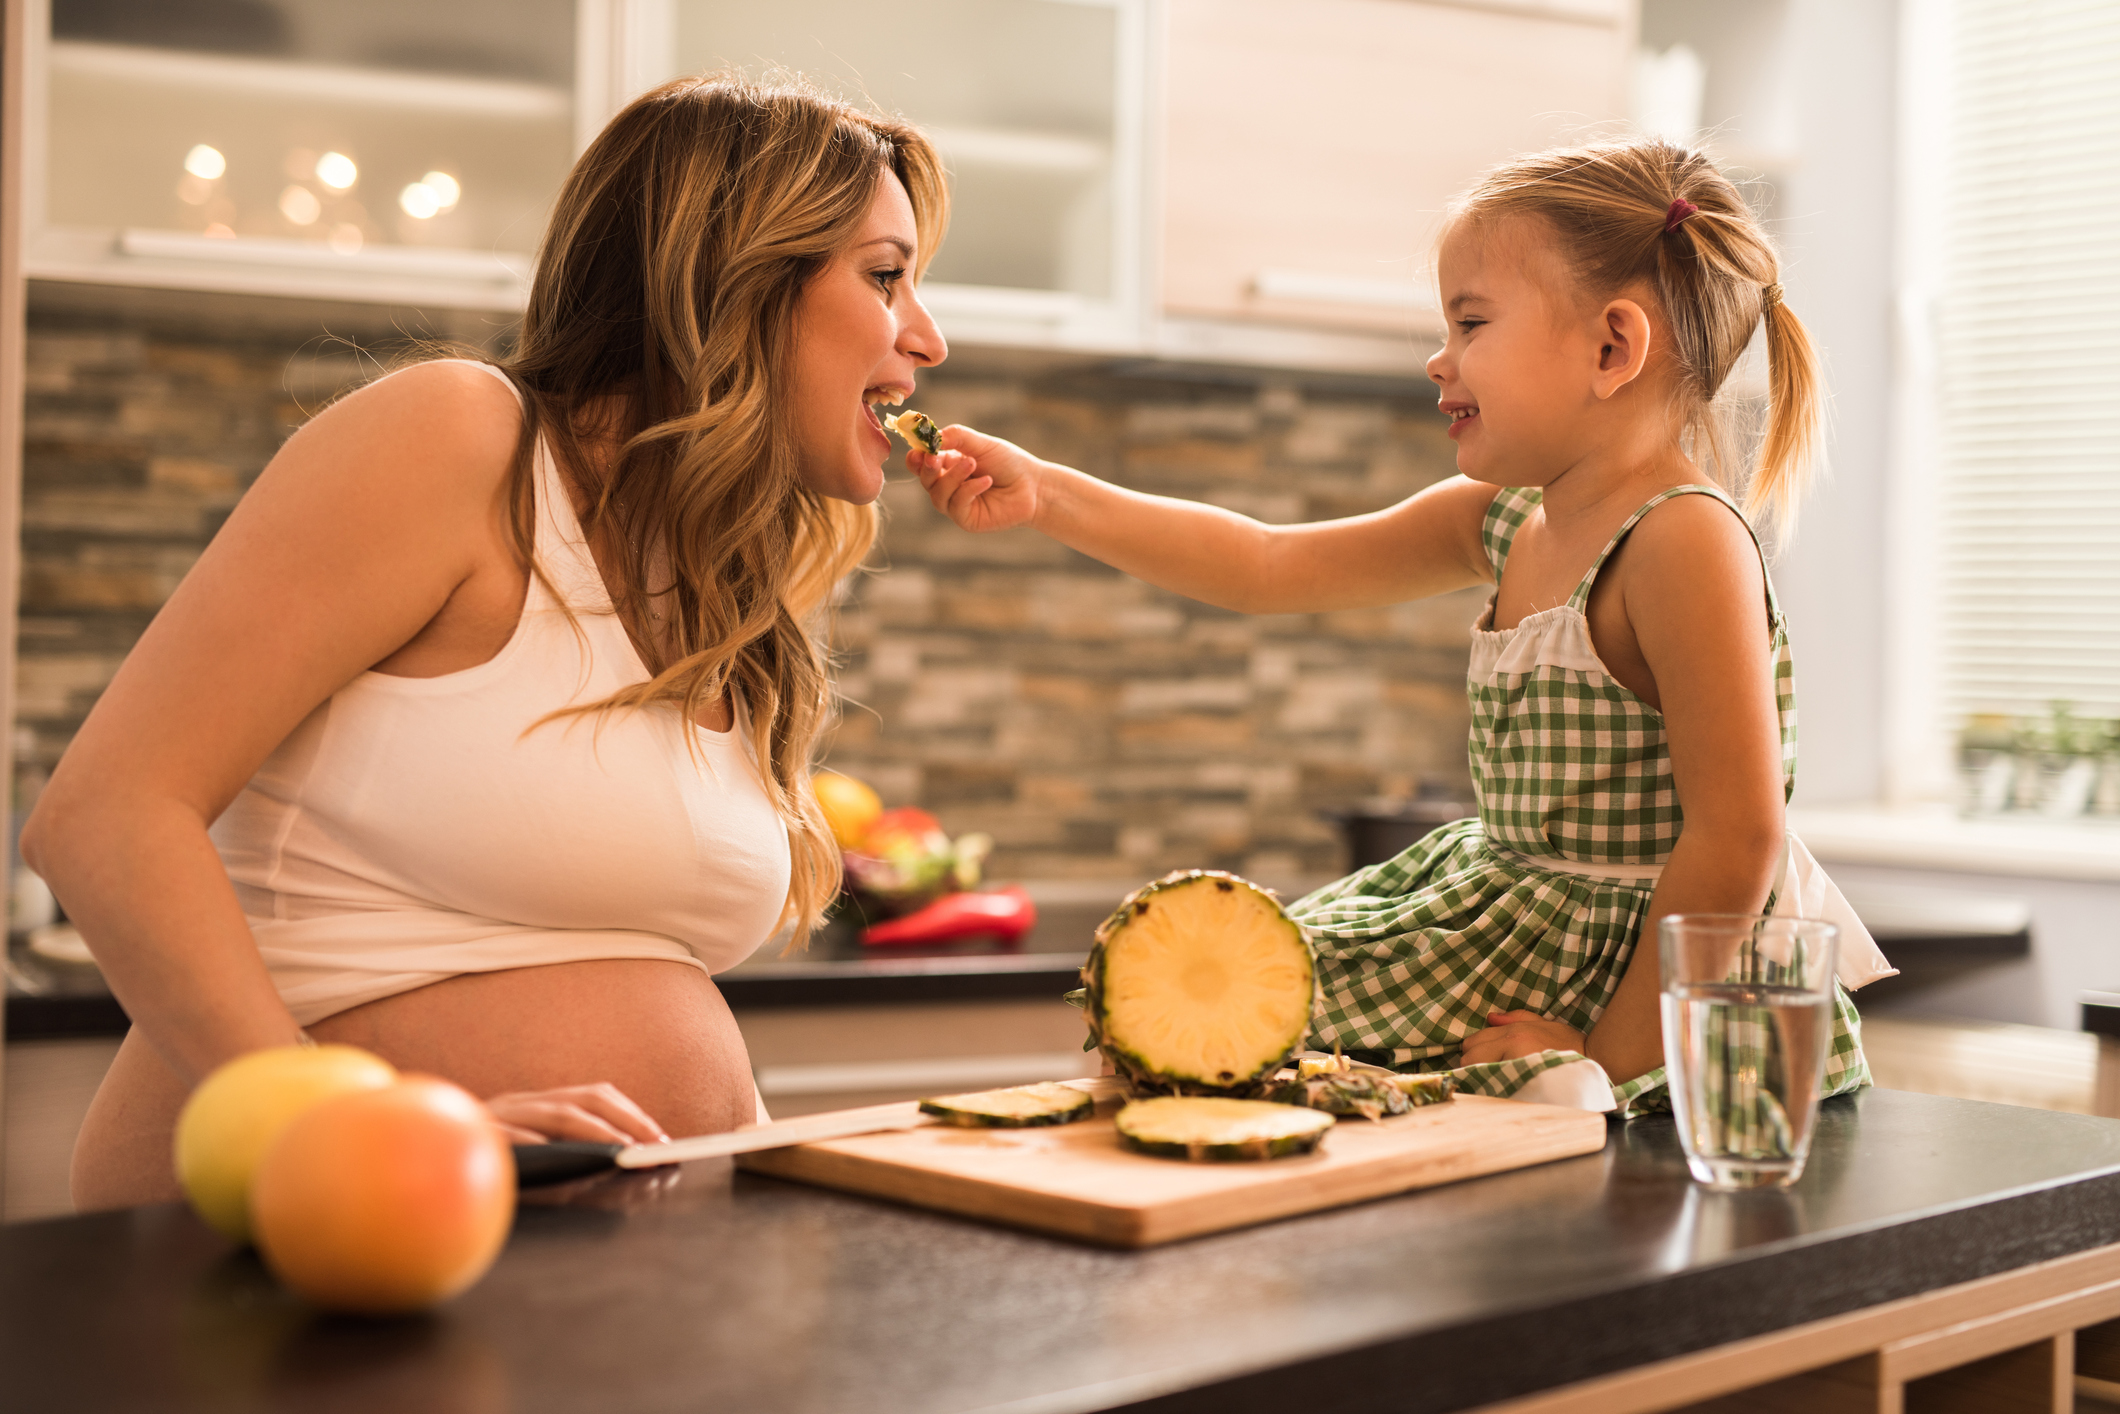 Cute little girl feeding her expecting mother with fresh pineapple in the kitchen.